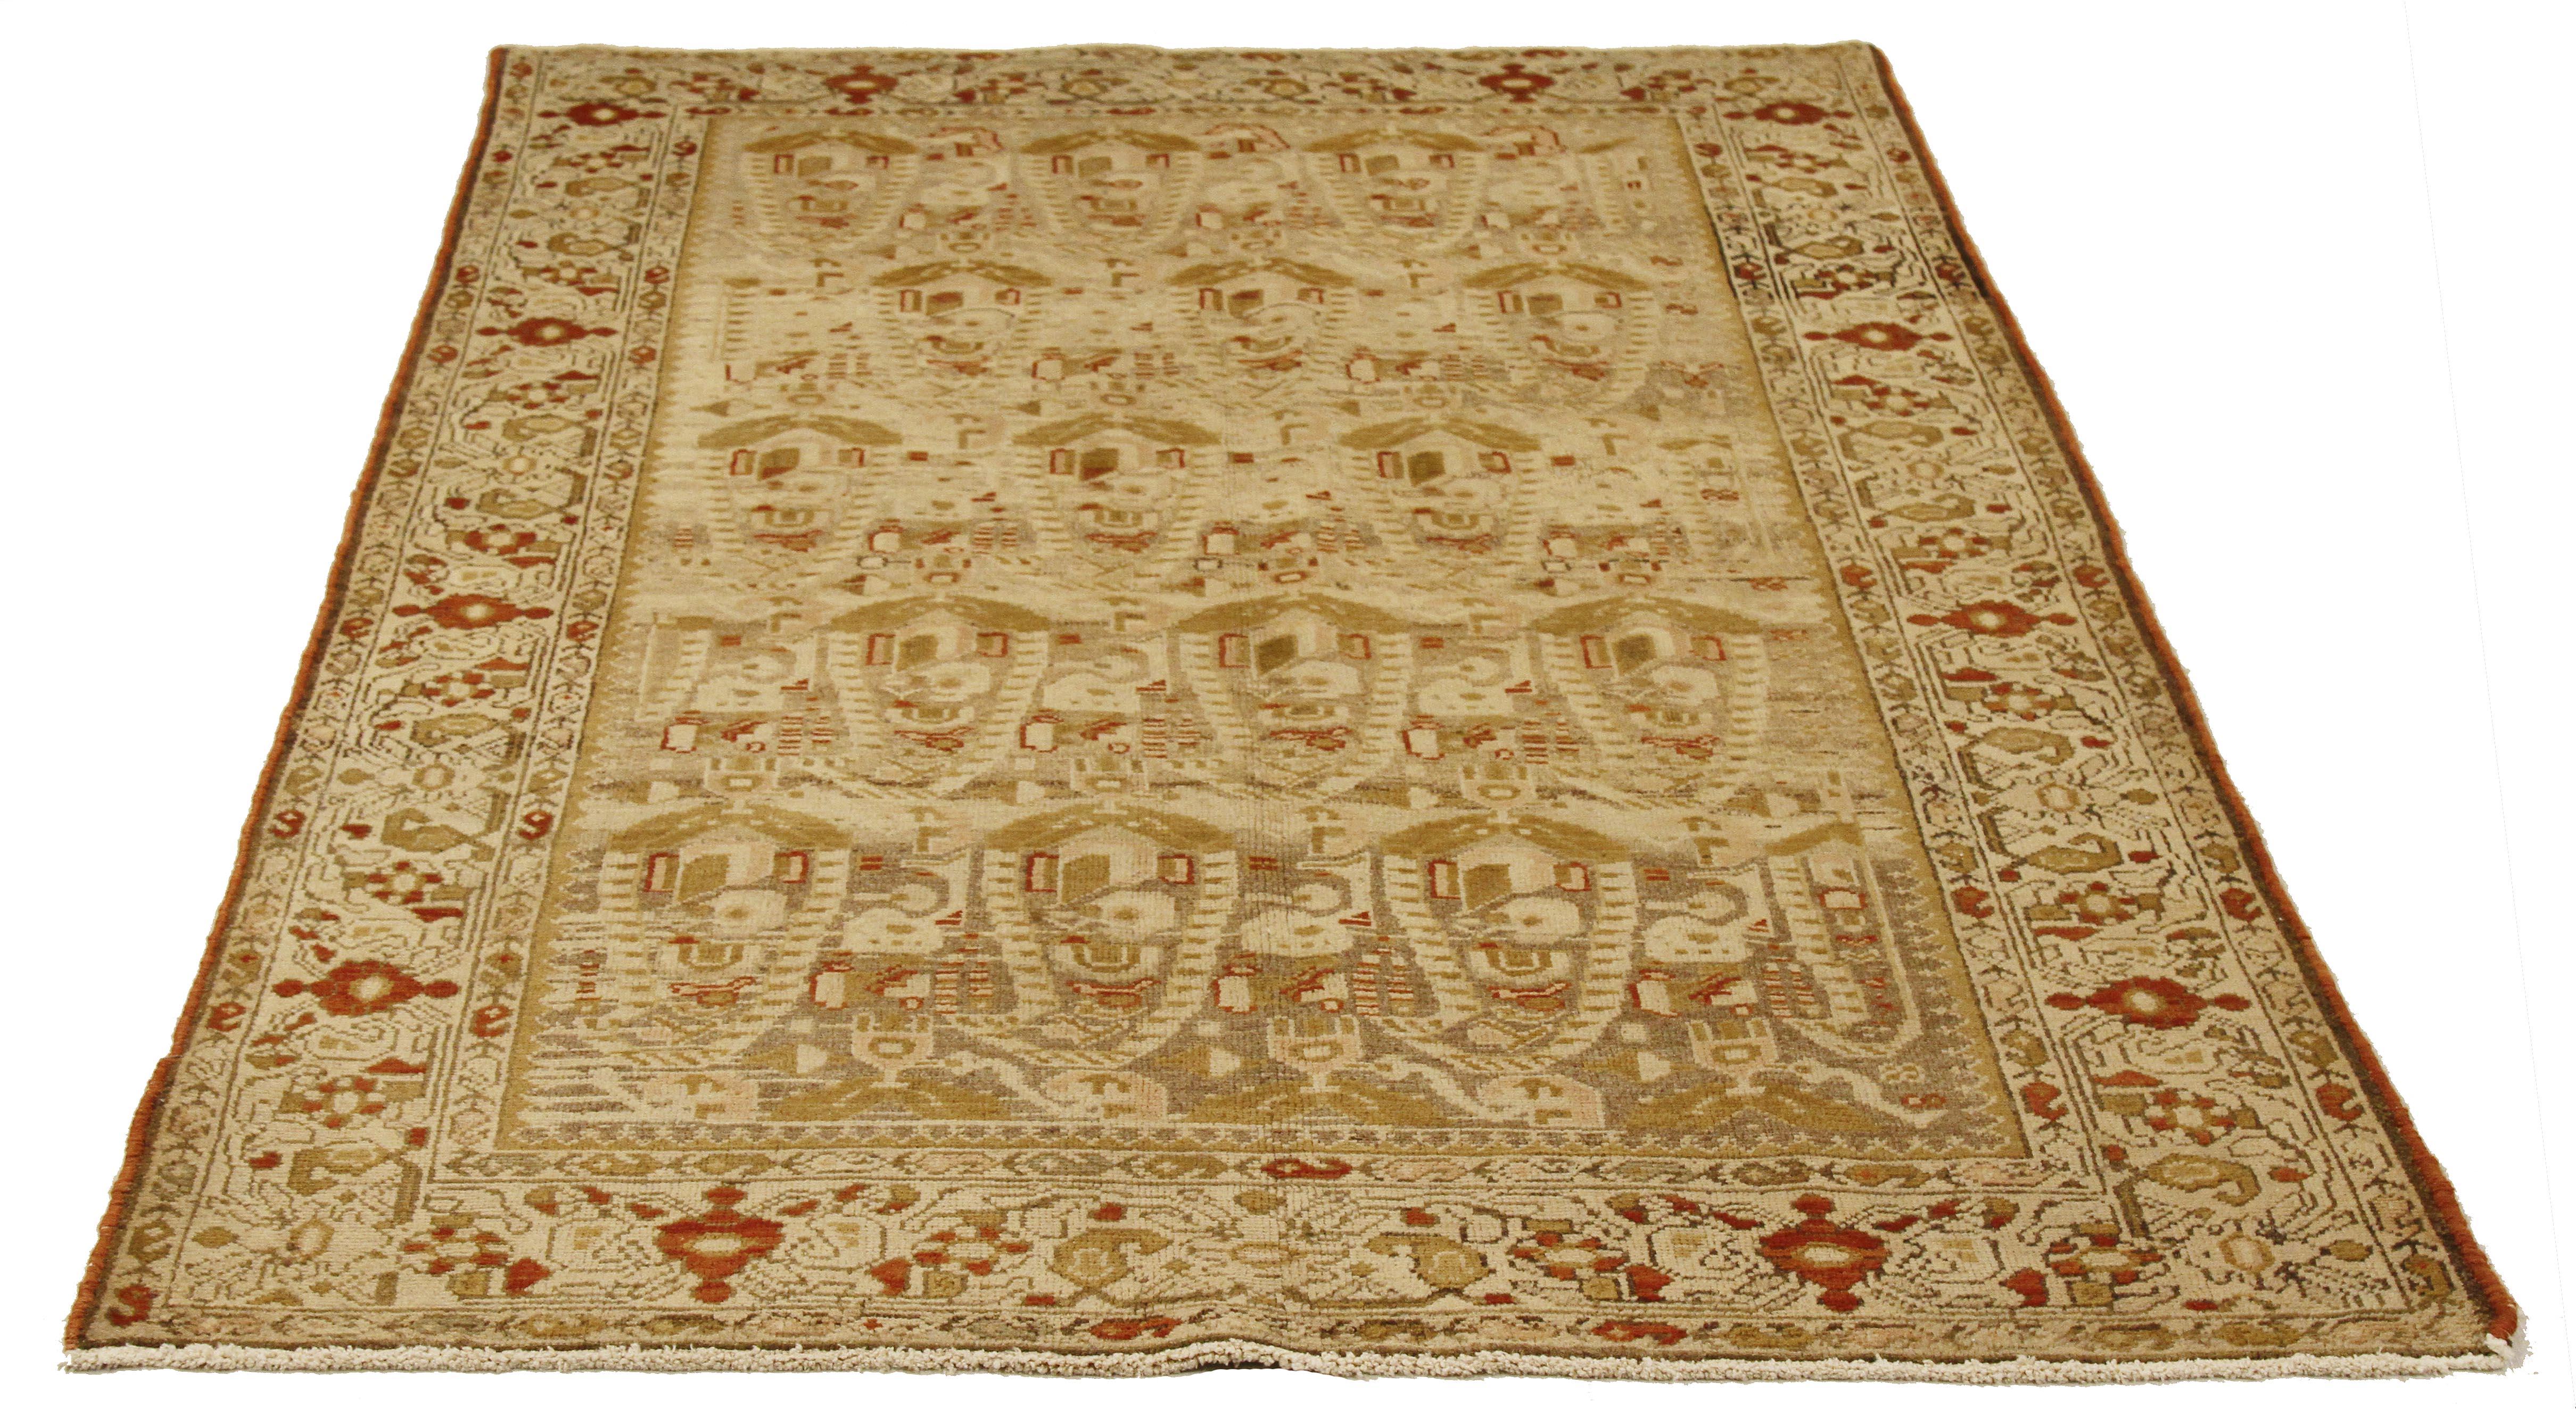 Antique Persian rug handwoven from the finest sheep’s wool and colored with all-natural vegetable dyes that are safe for humans and pets. It’s a traditional Malayer design featuring green and red botanical details all-over an ivory field. It’s a